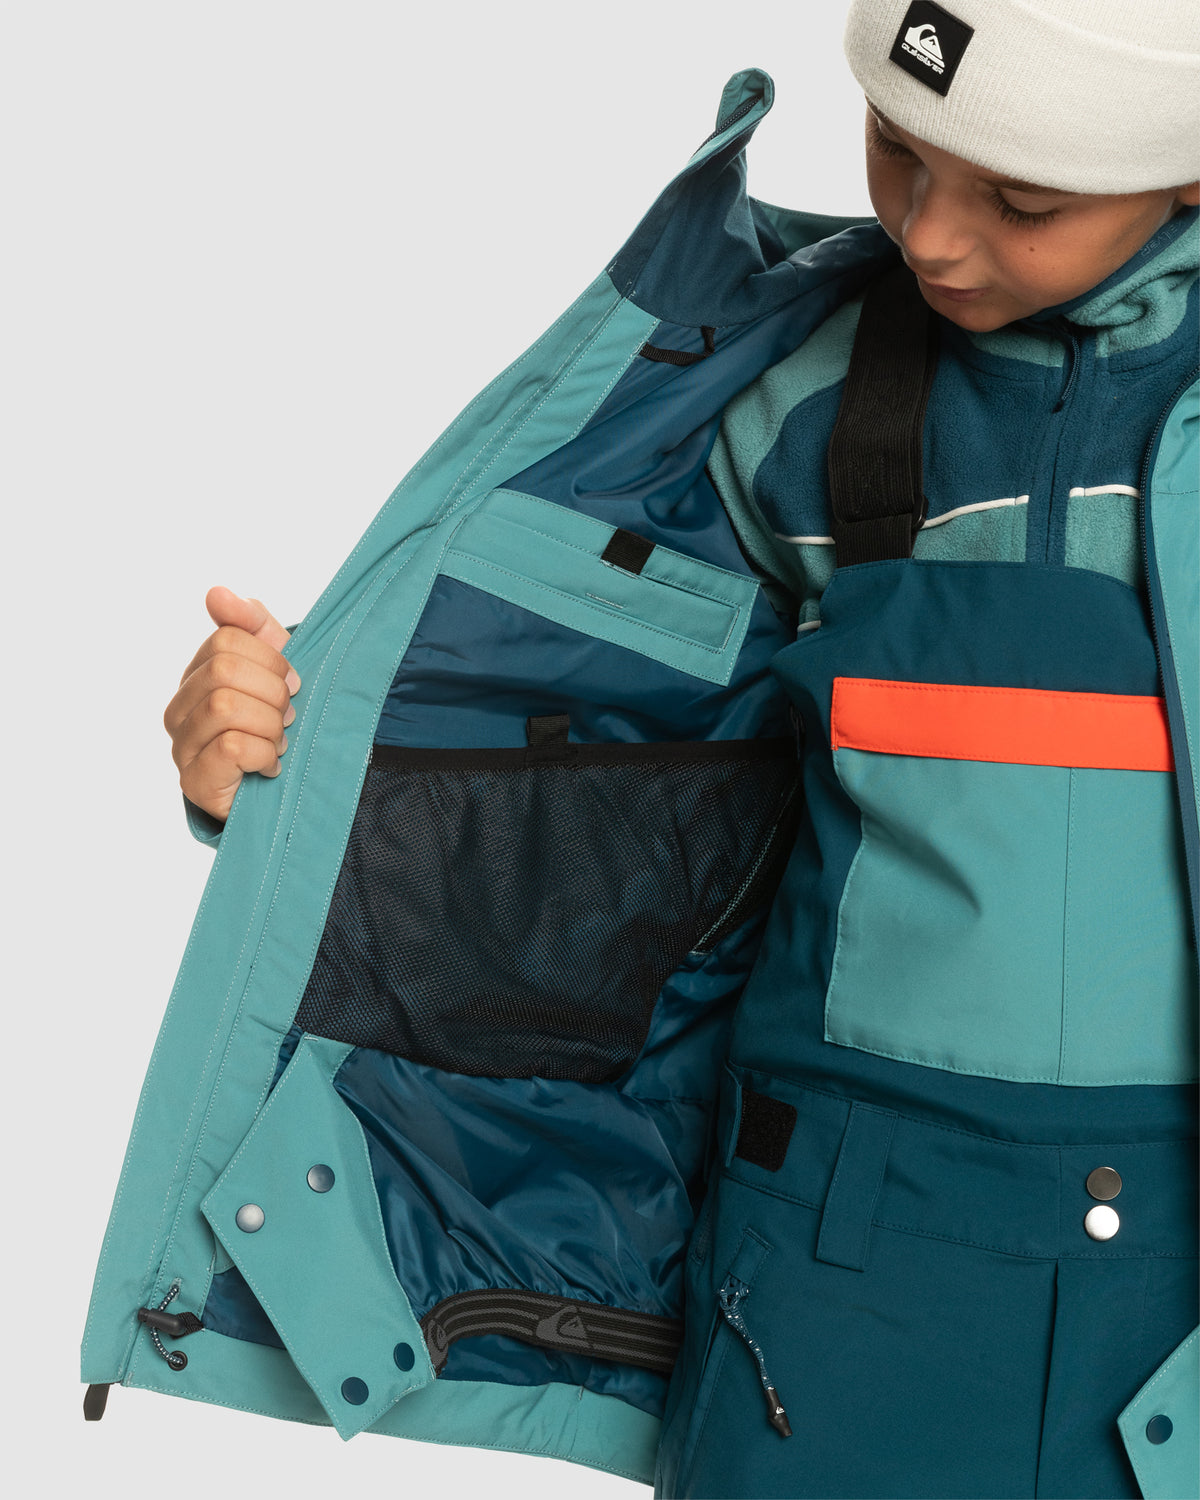 Quiksilver Travis Rice Youth Jacket